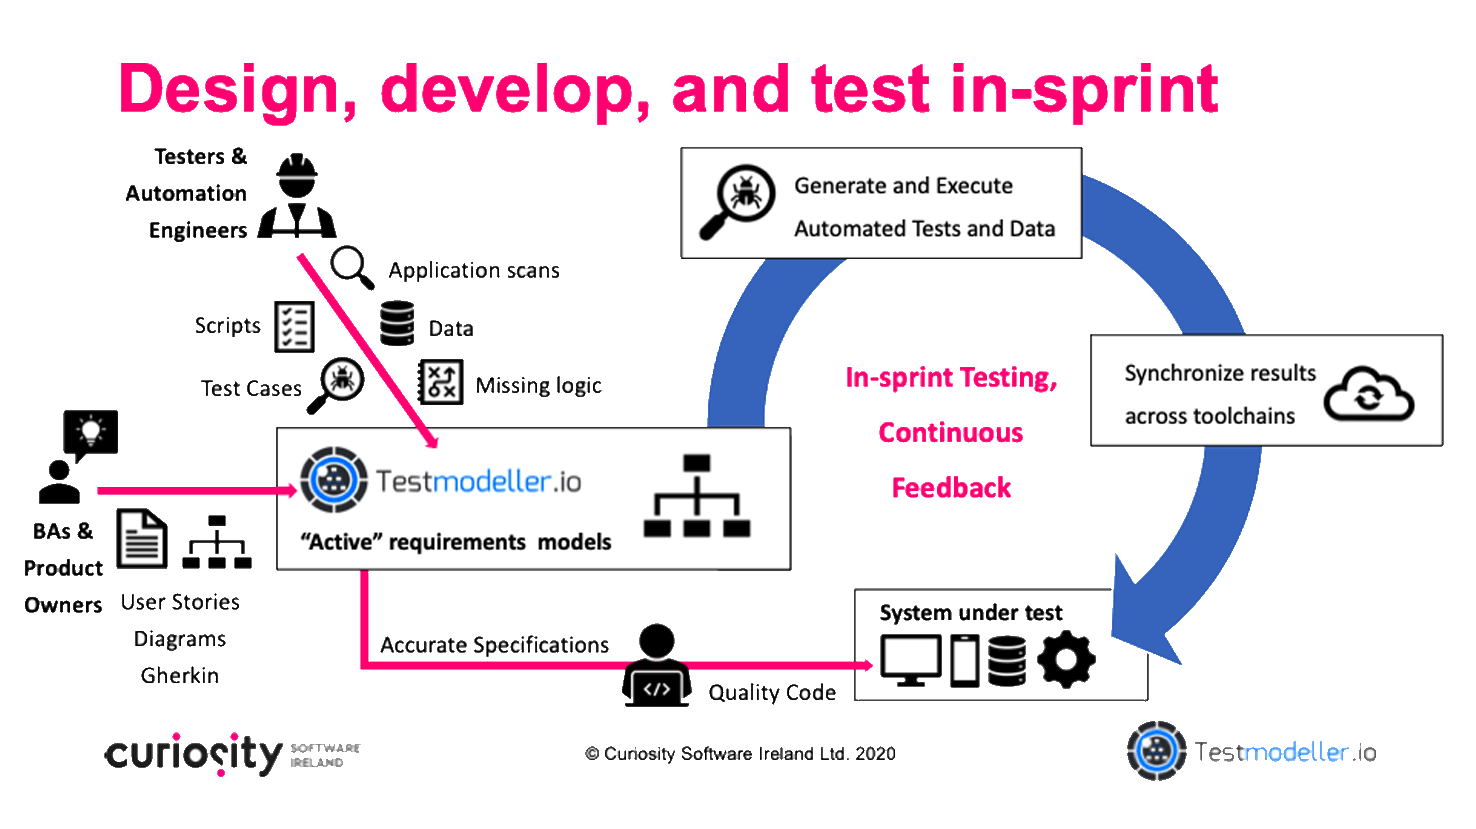 Design, develop, and test in-sprint with Test Modeller’s Continuous Testing Capabilities.